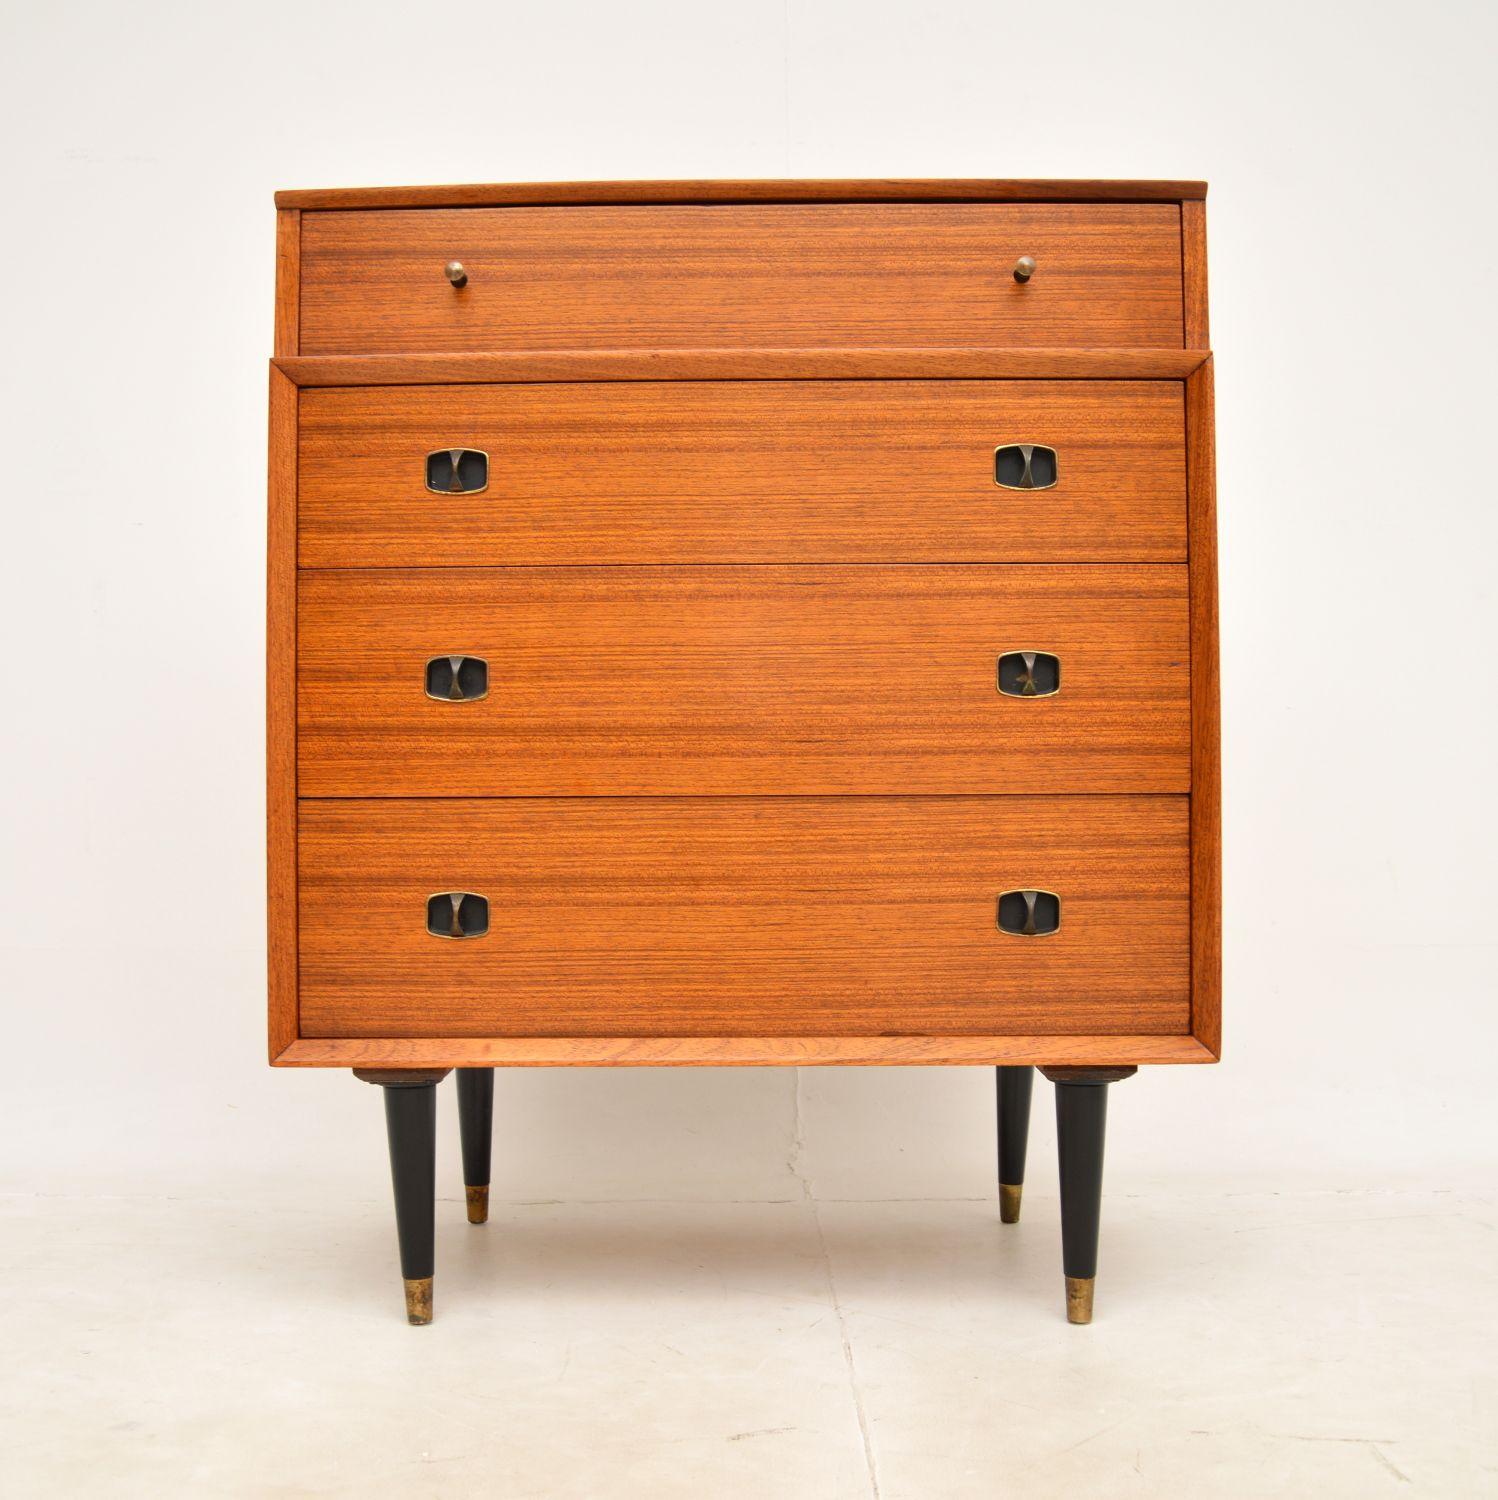 A very stylish and useful vintage walnut chest of drawers. This was made in England, it dates from around the 1950-60’s.

This is of great quality, it is beautifully designed with lots of storage space. It sits on ebonised tapered legs with brass